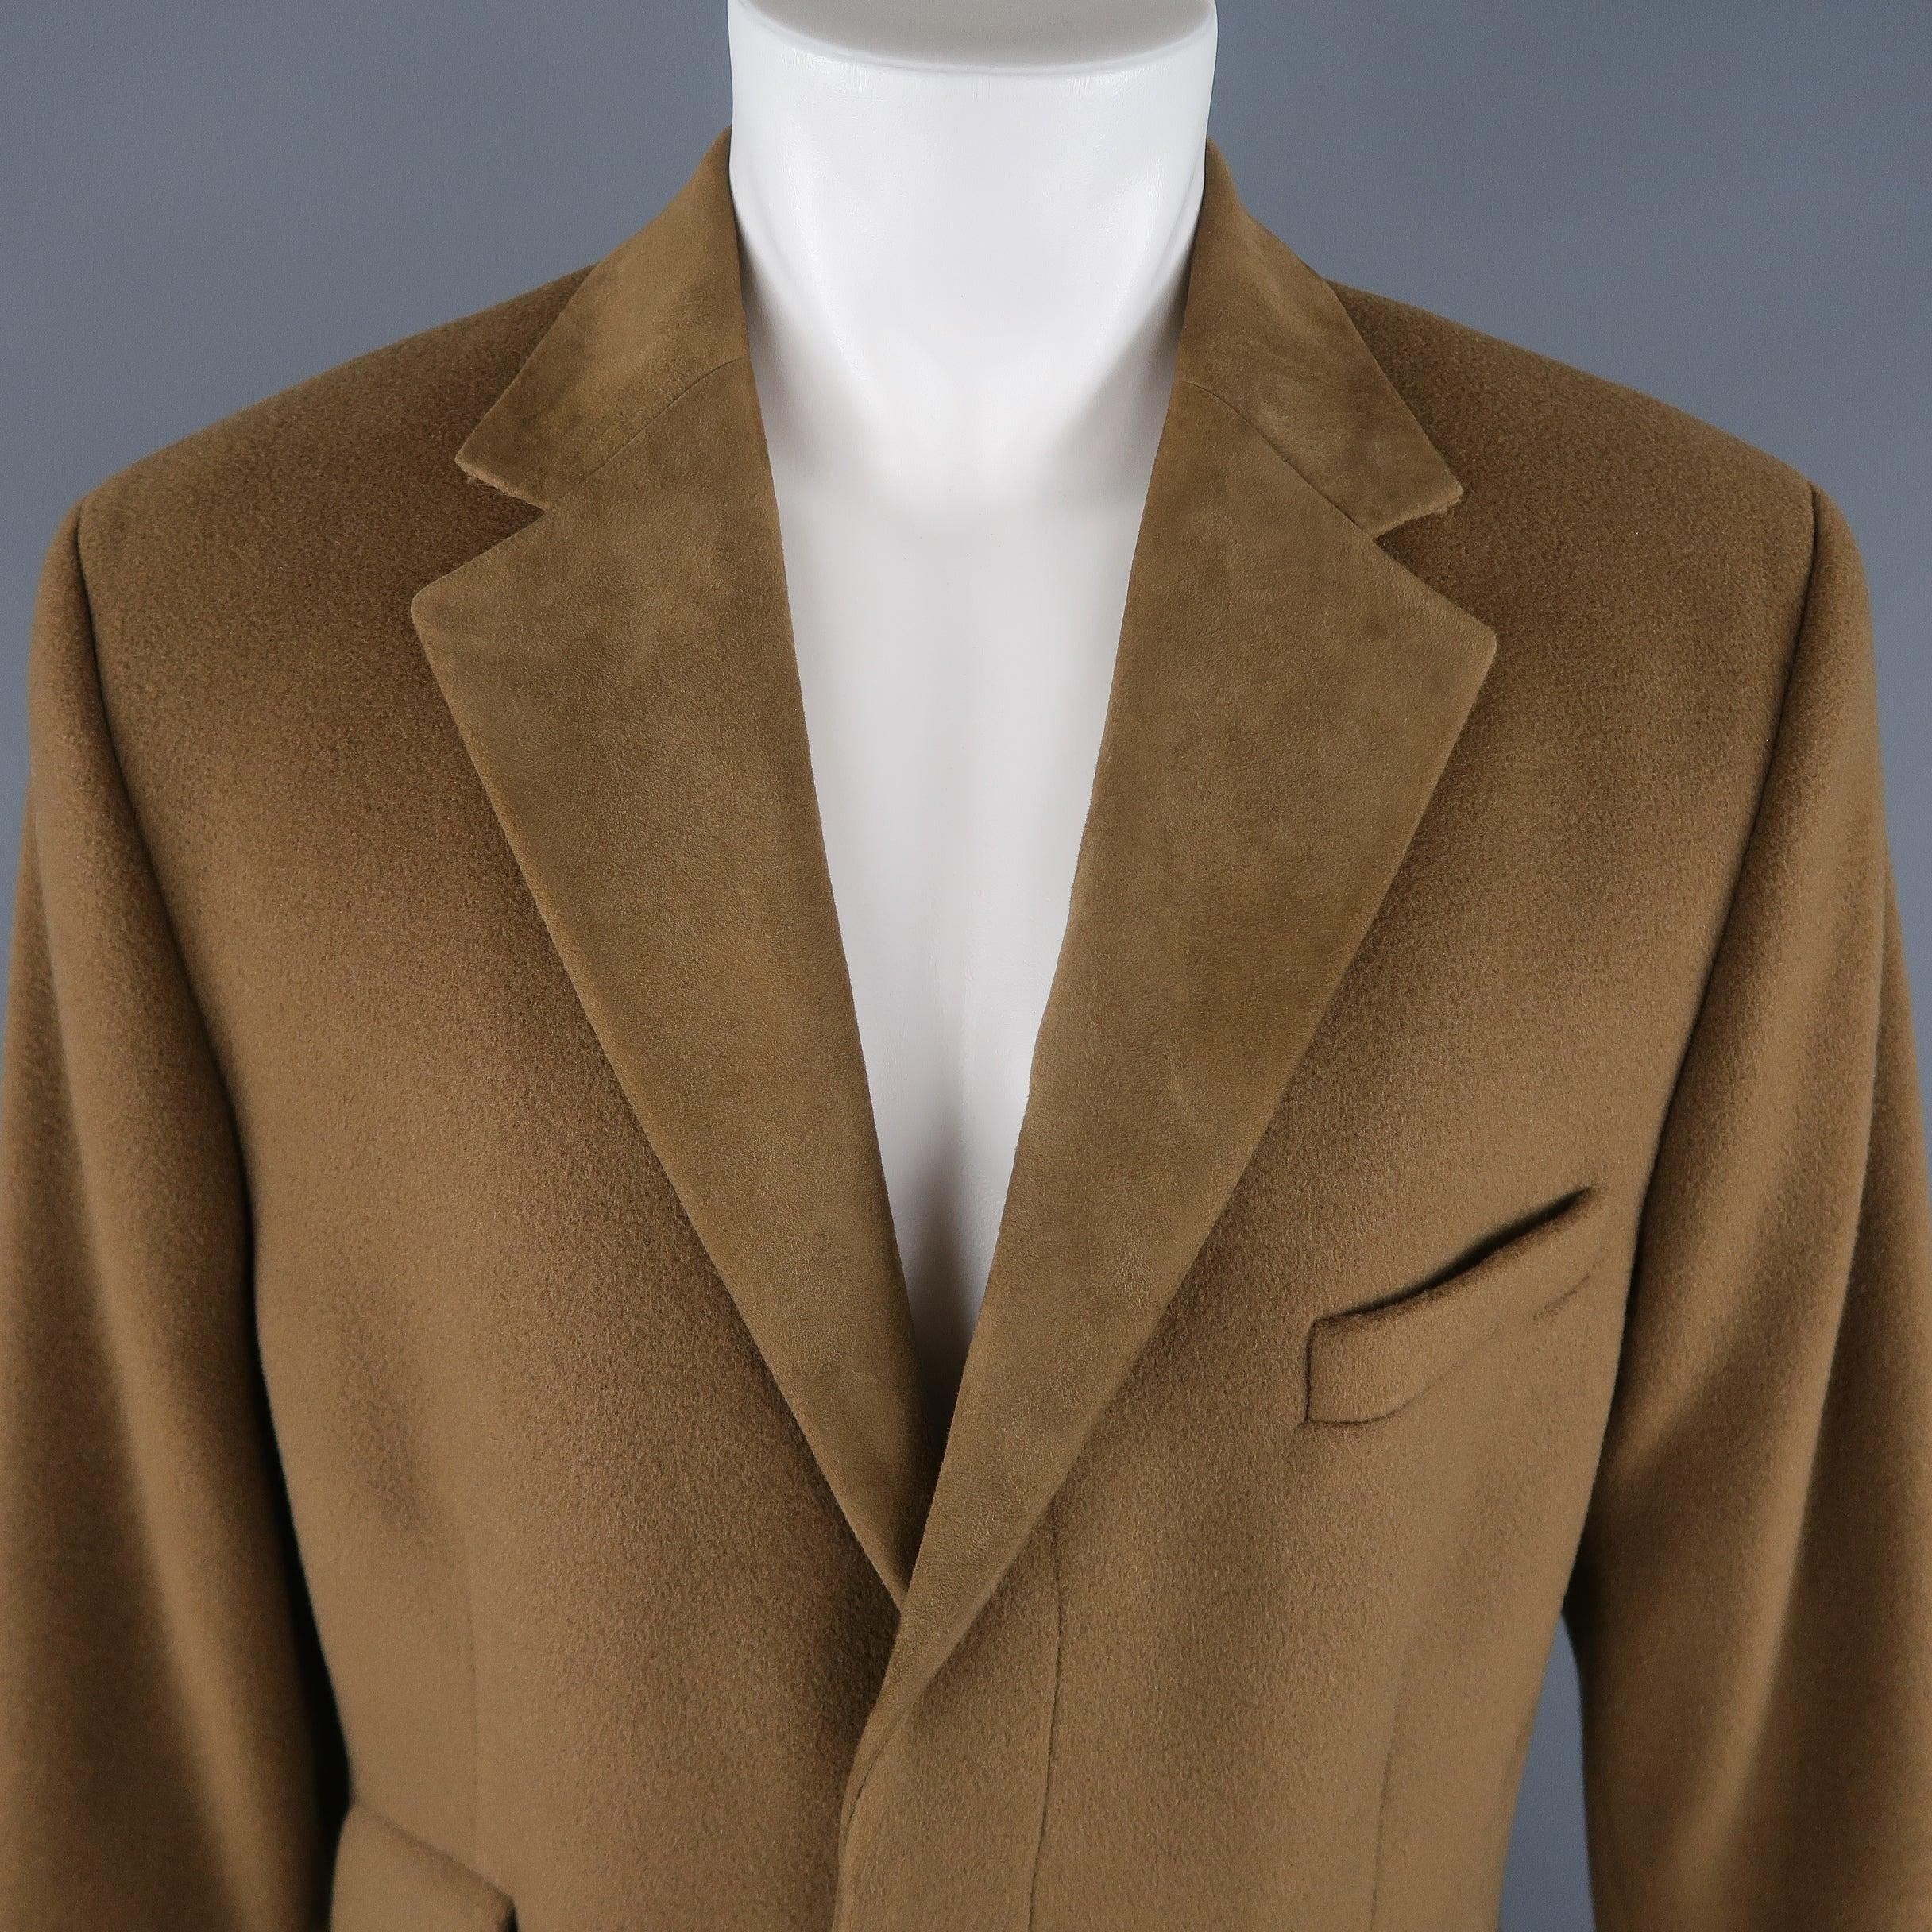 Vintage GIANNI VERSACE over coat comes in light olive green wool with a hidden placket button up closure, triple mock flap pockets, and suede notch lapel. Made in Italy.Excellent Pre-Owned Condition. 

Marked:   M 

Measurements: 
  Chest: 46 inches